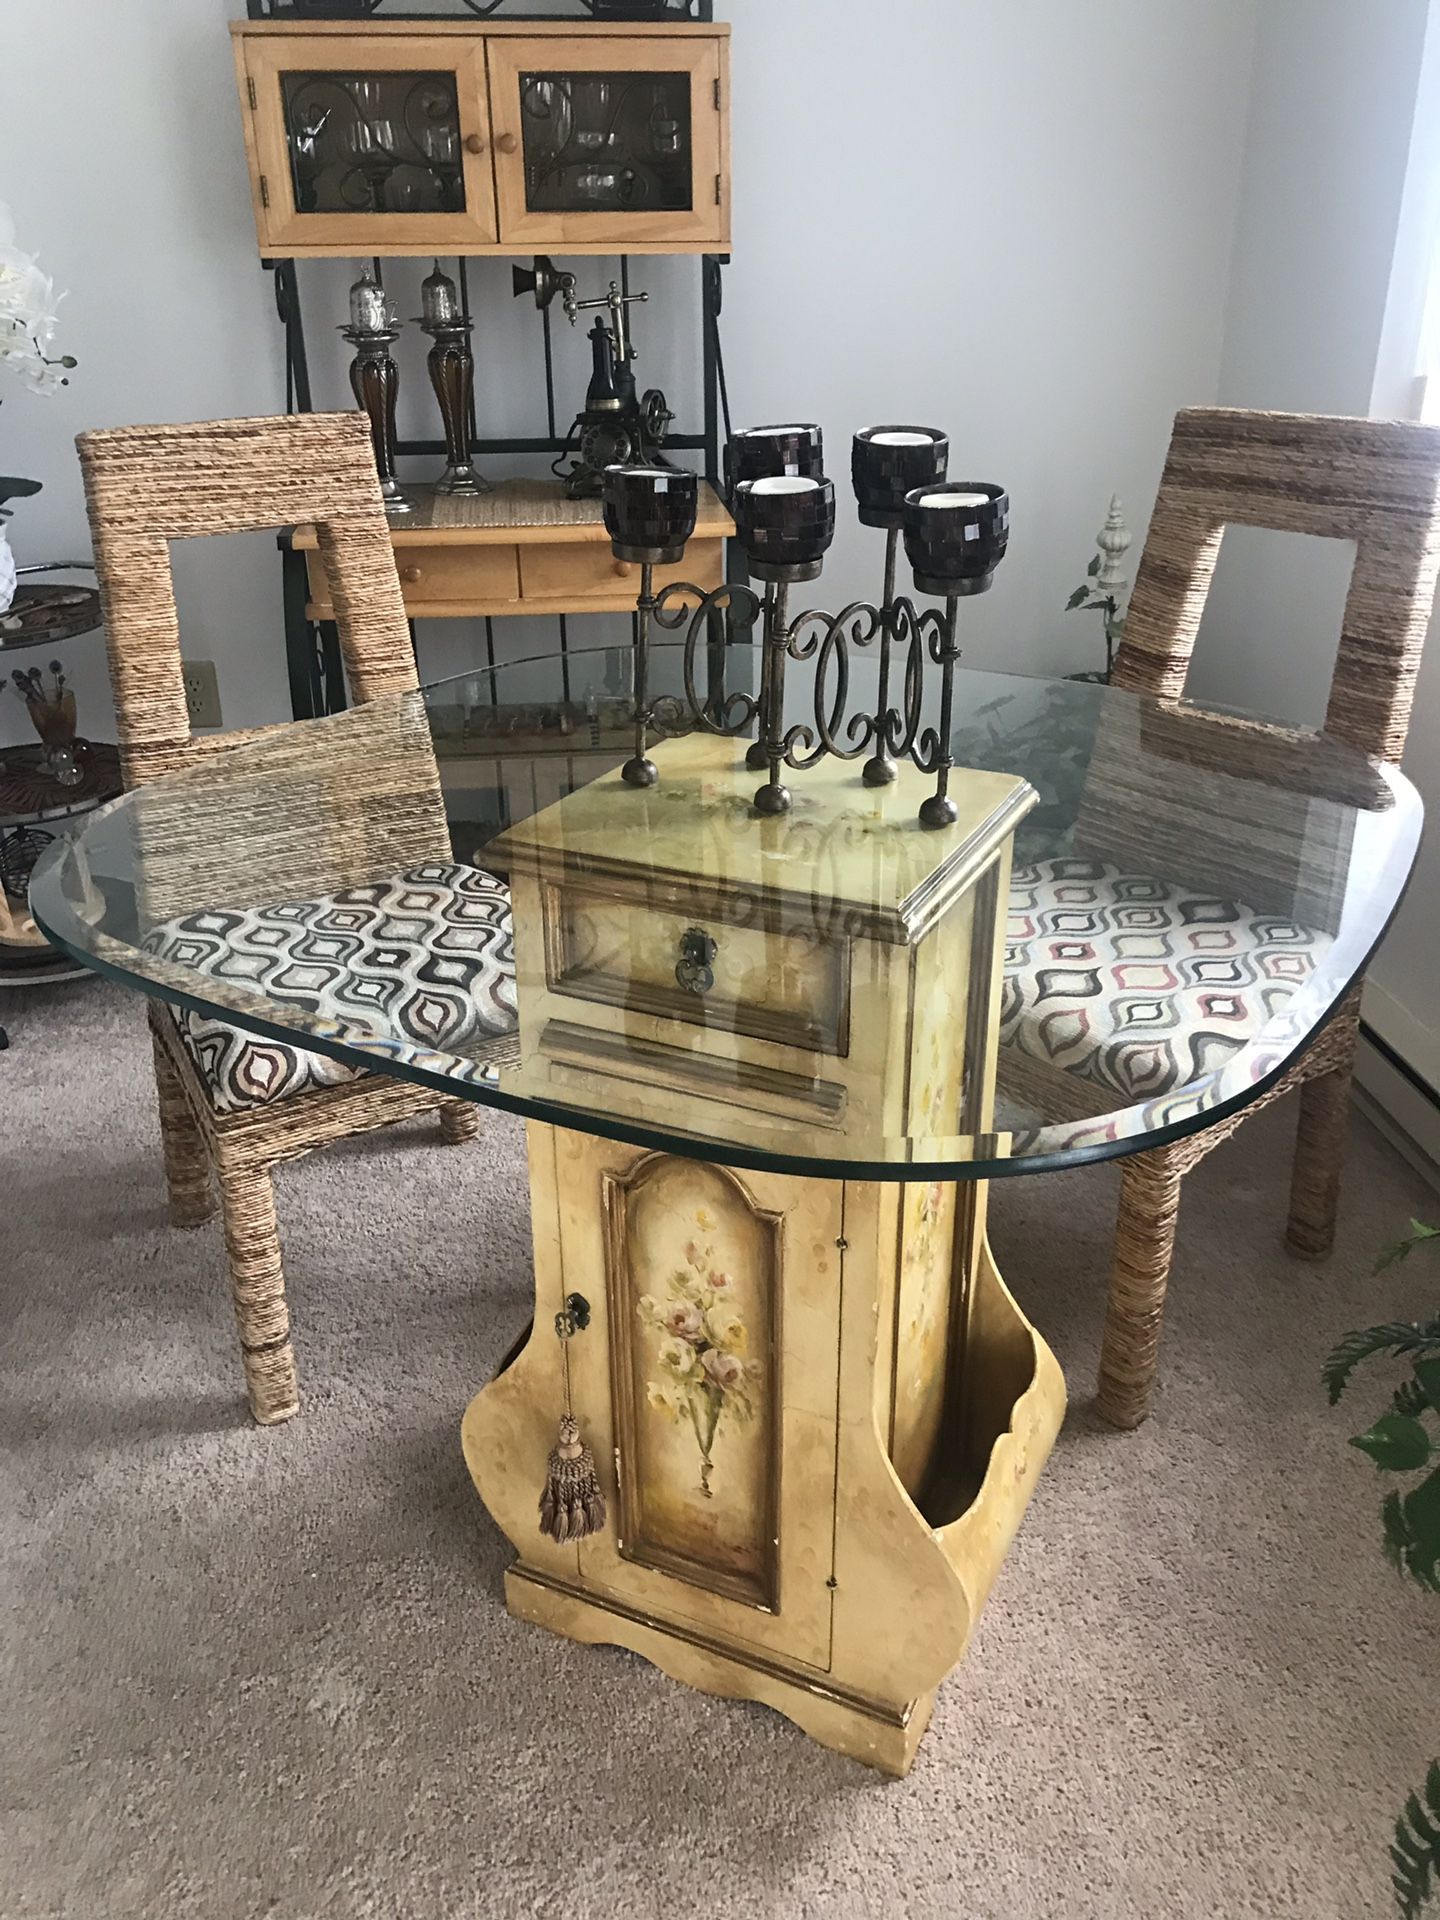 Top glass and little cute antique furniture